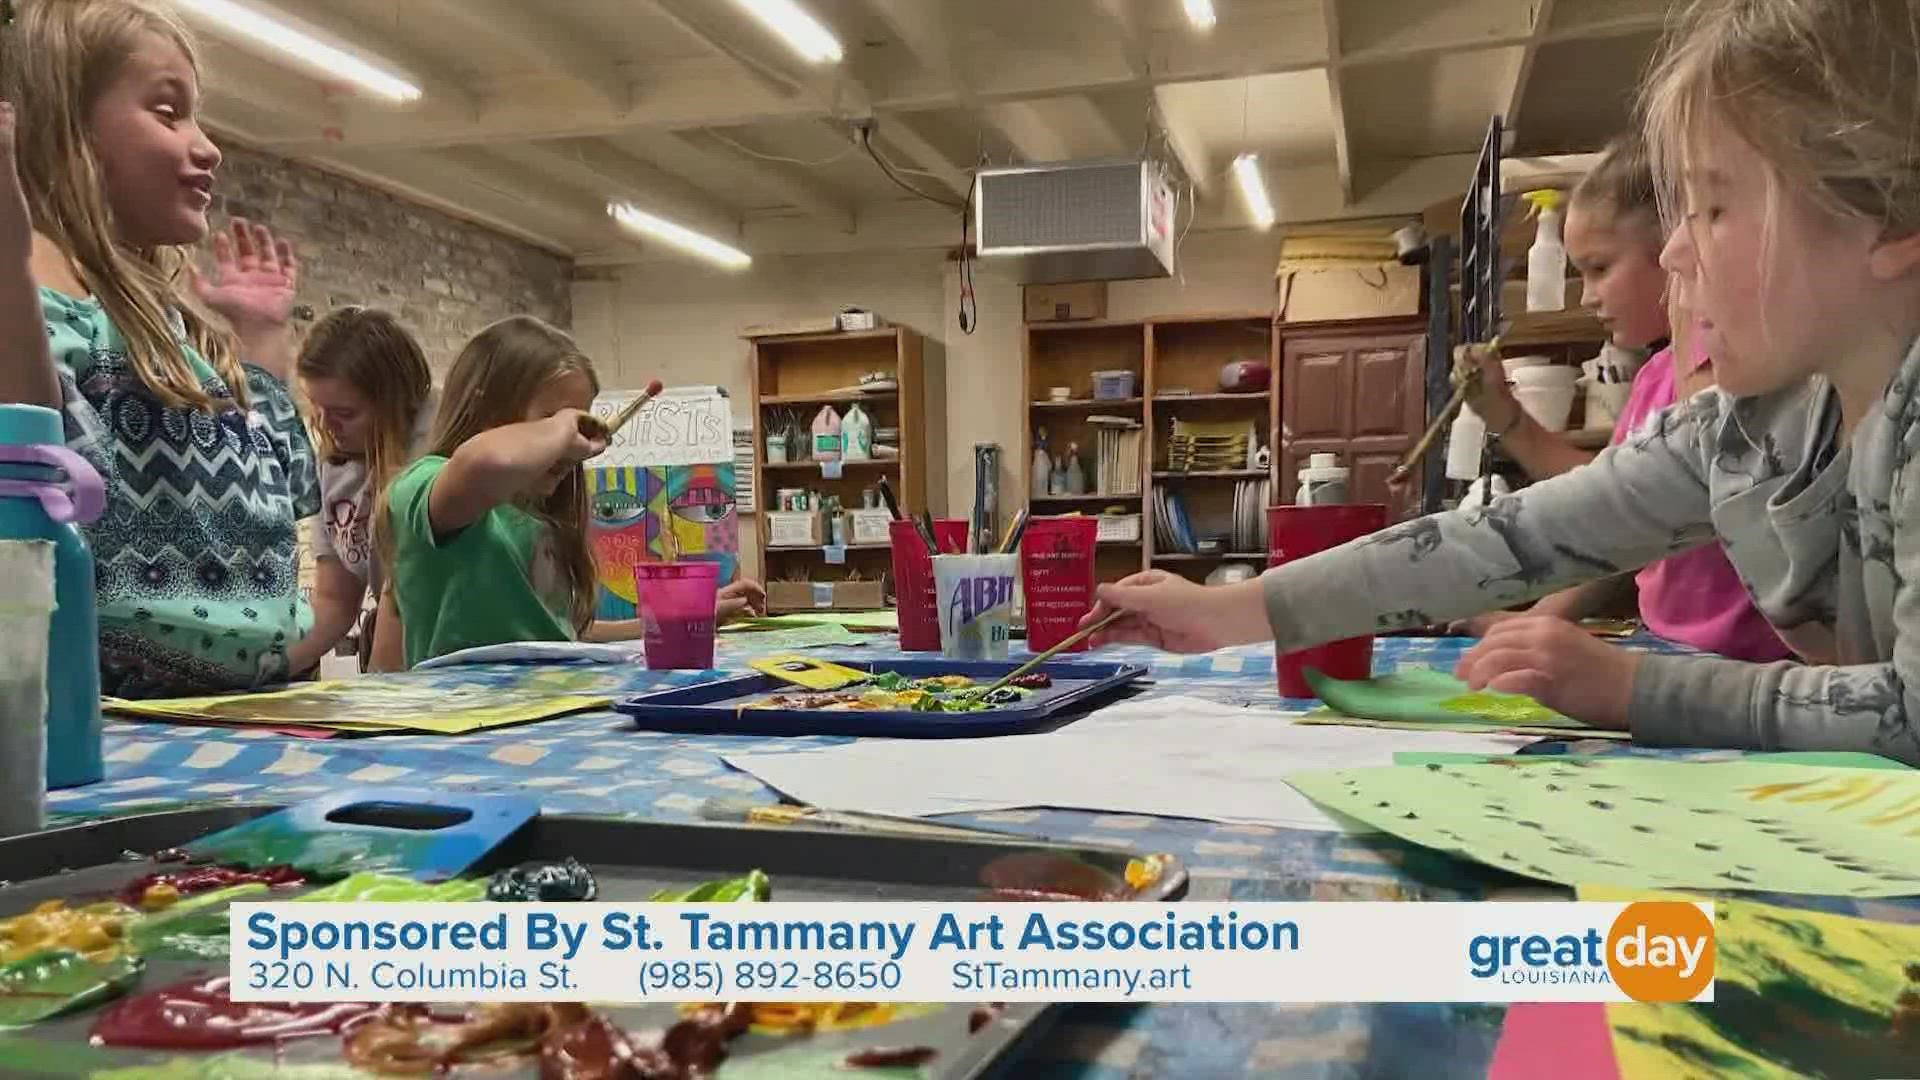 The mission of the St. Tammany Art Association is to bring the fine arts to St. Tammany Parish, support local artists, and provide art education to the public.